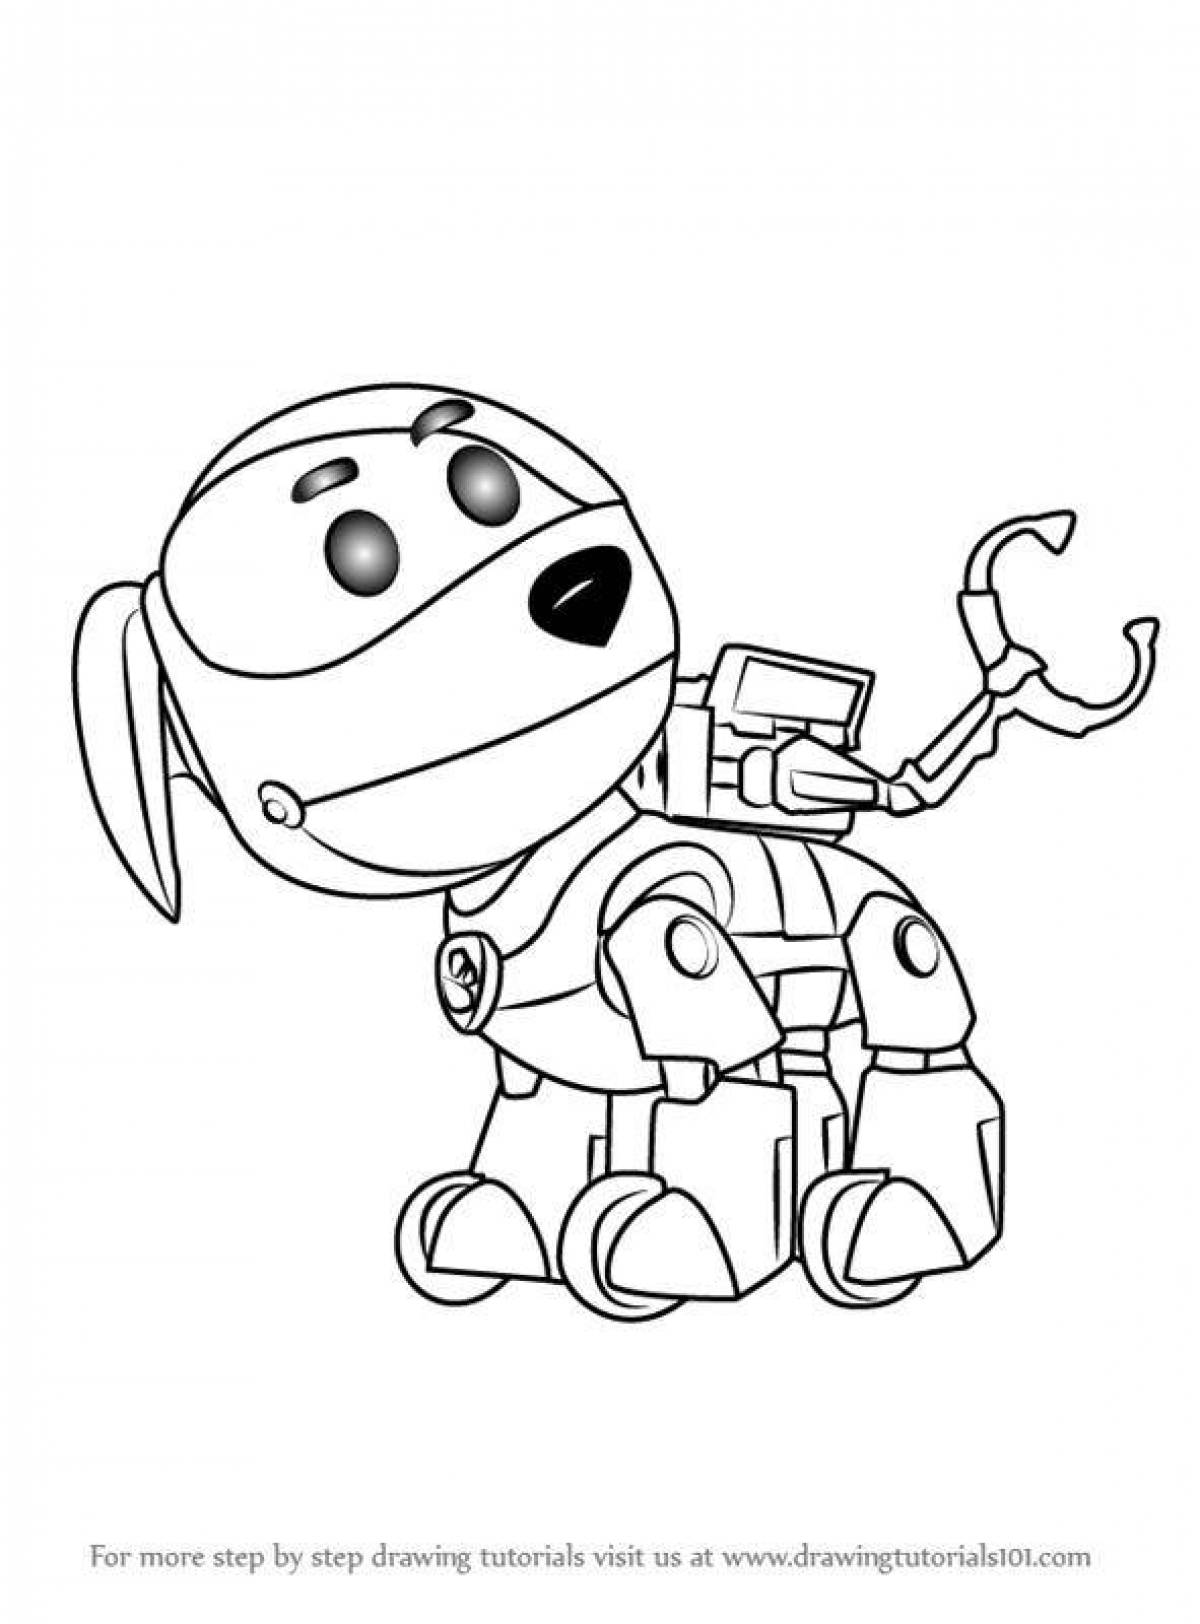 Coloring page amazing robot dog